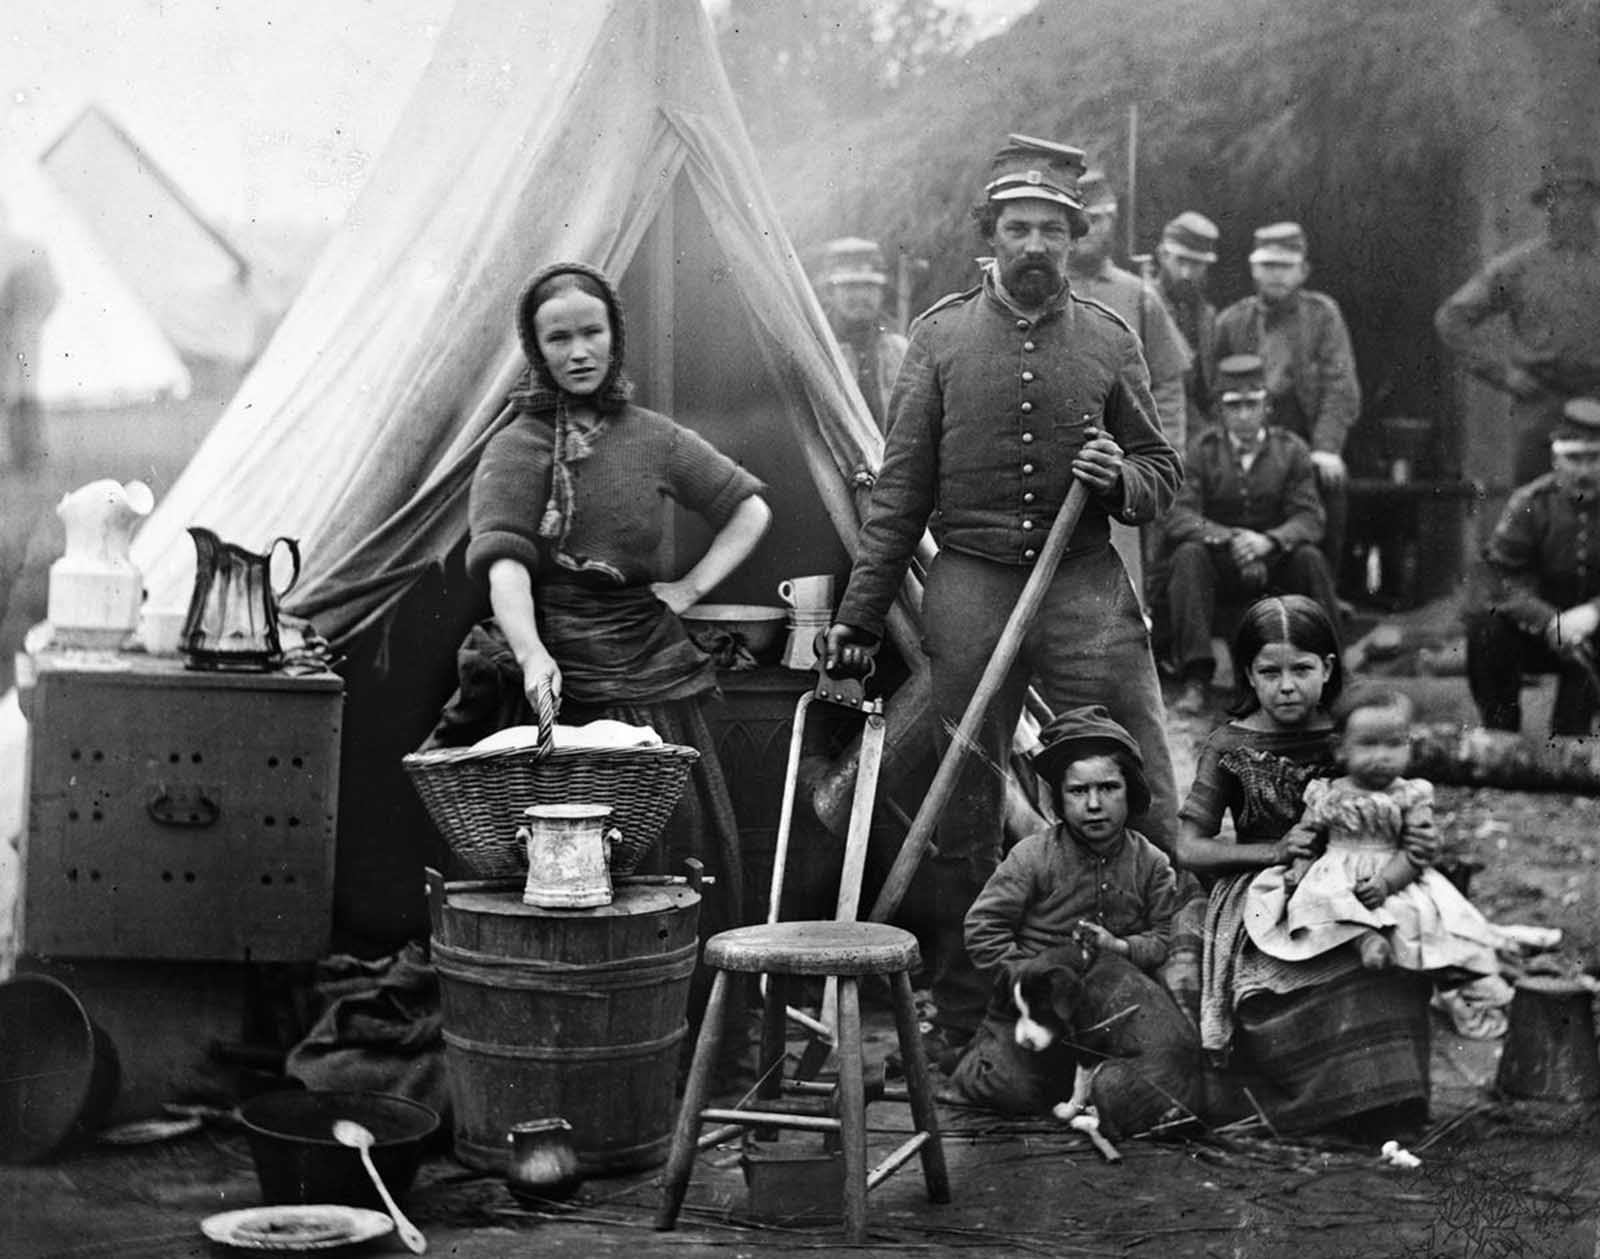 The routines of camp life of the 31st Penn. Infantry (later, 82d Penn. Infantry) at Queen's farm, vicinity of Fort Slocum, Washington, District of Columbia, during the Civil War in 1861.